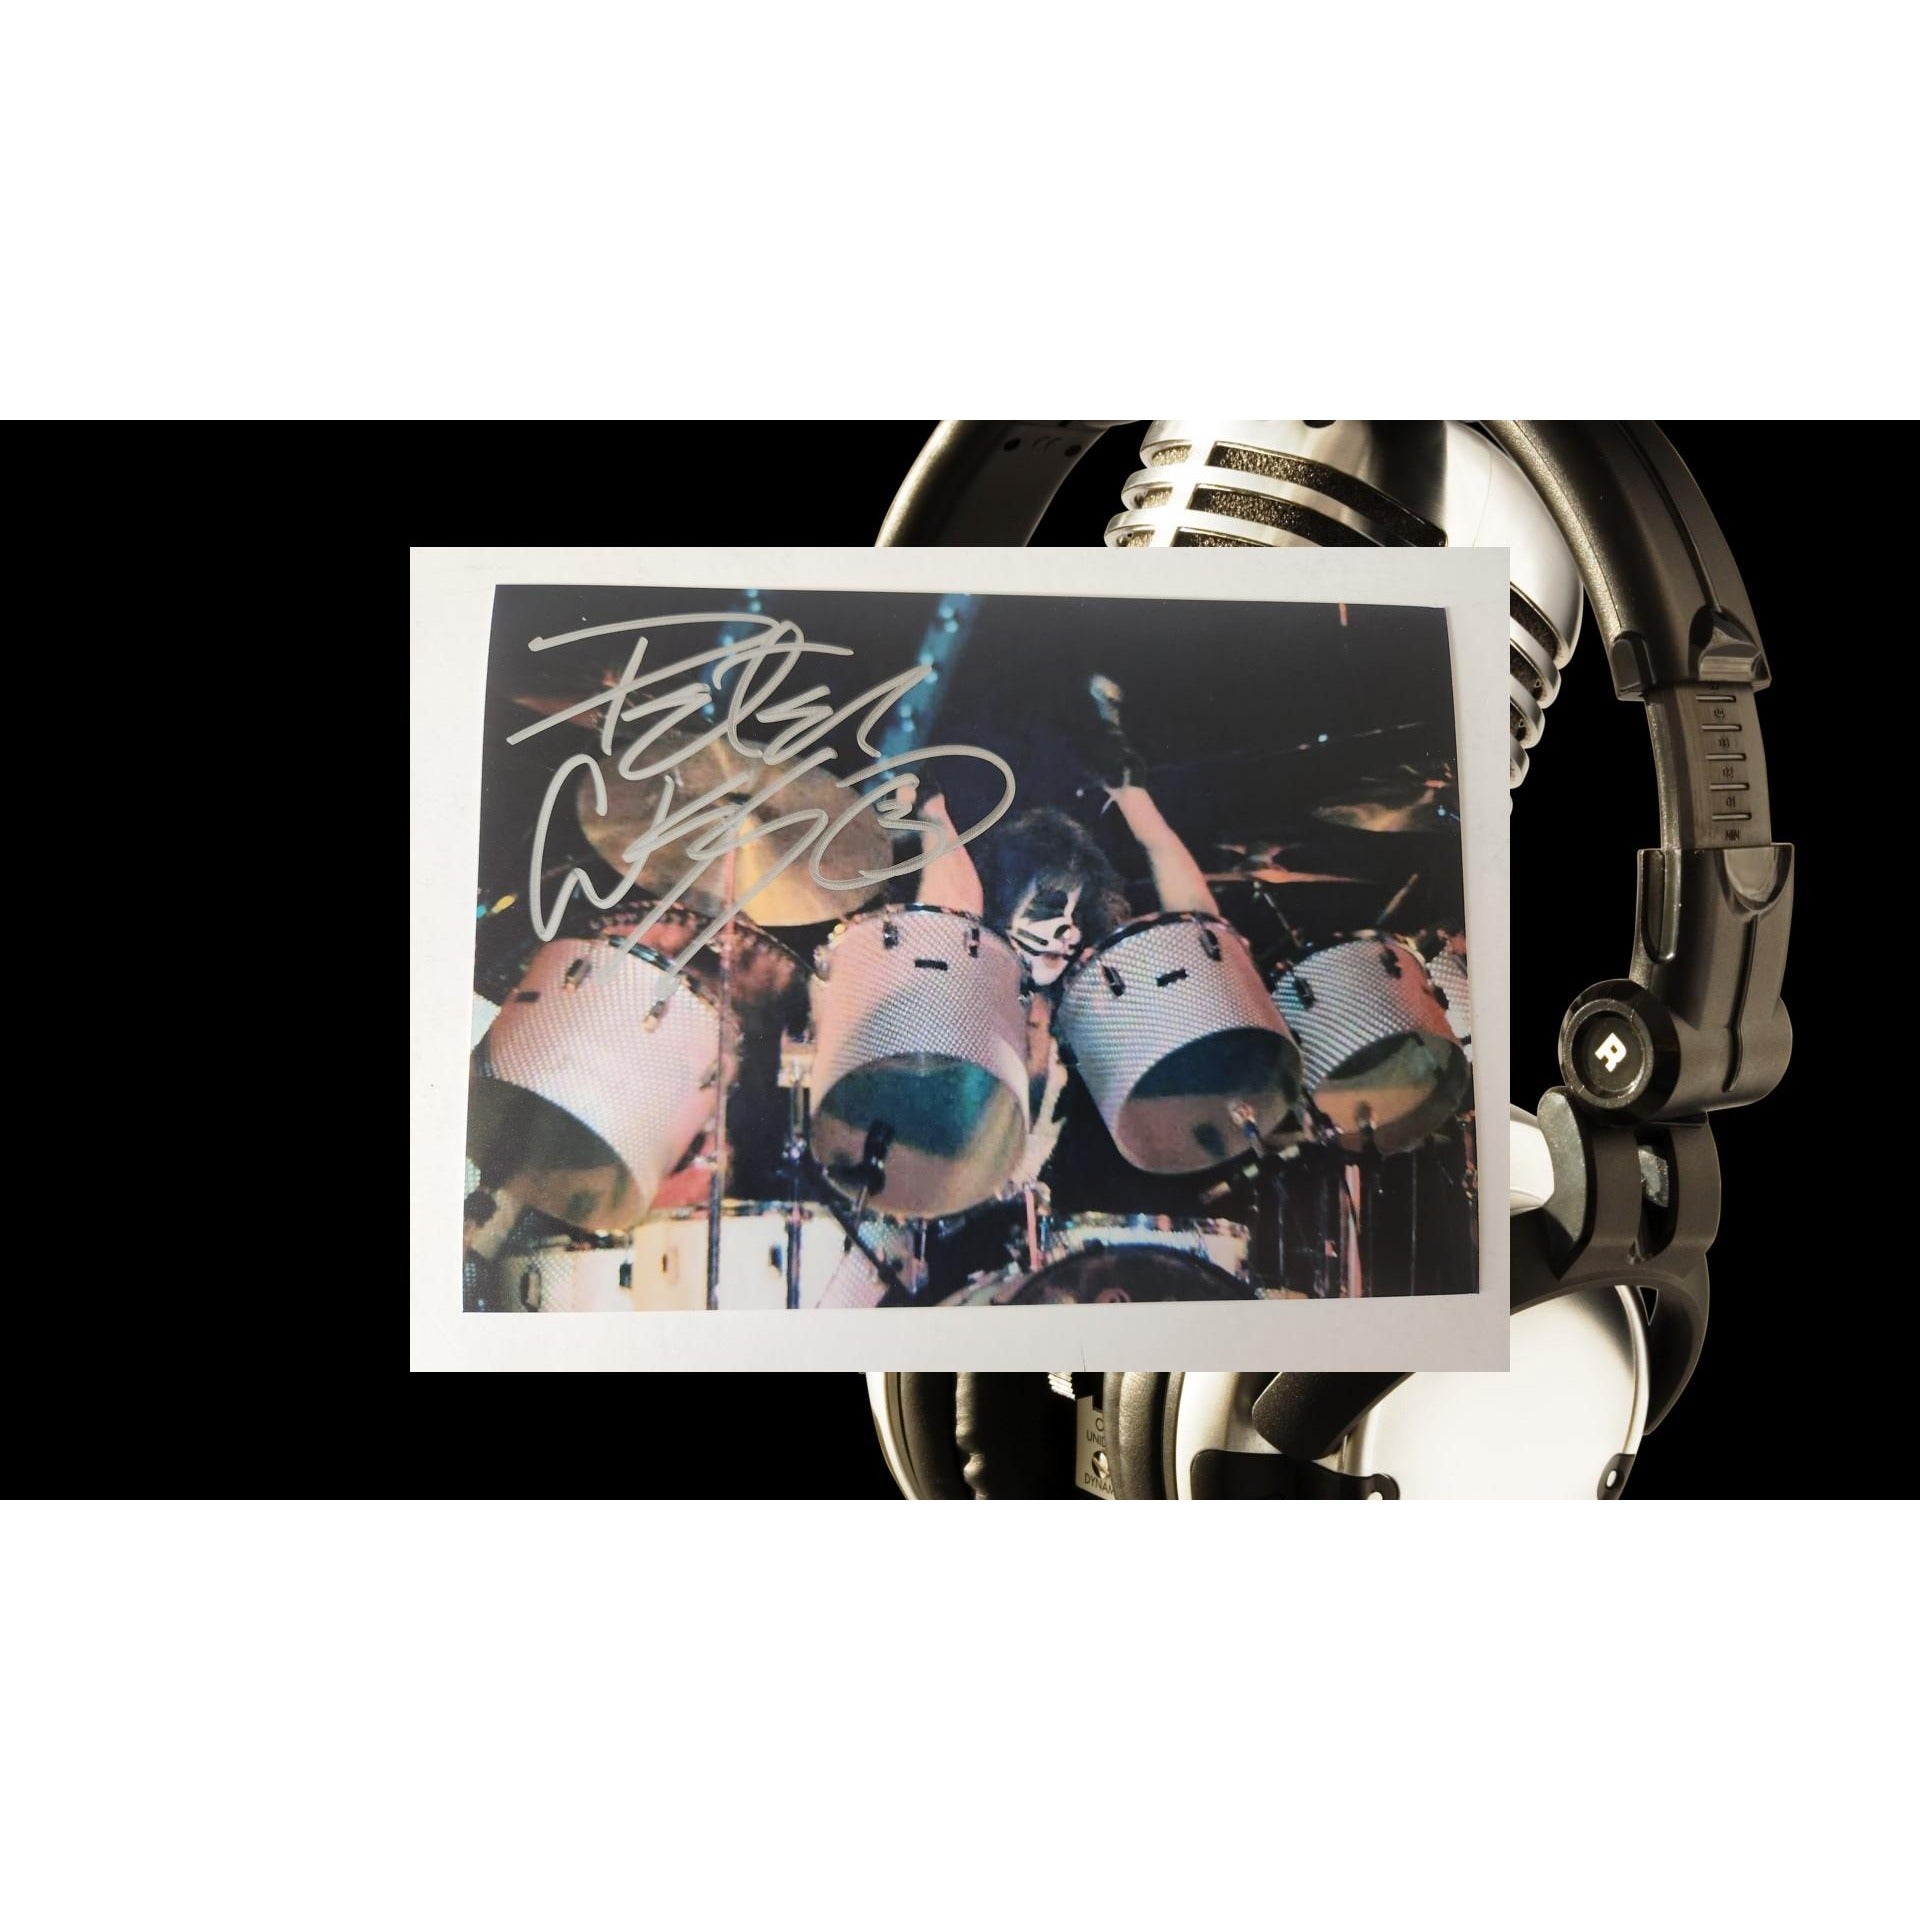 Peter Criss legendary Kiss drummer 5x7 photo signed with proof